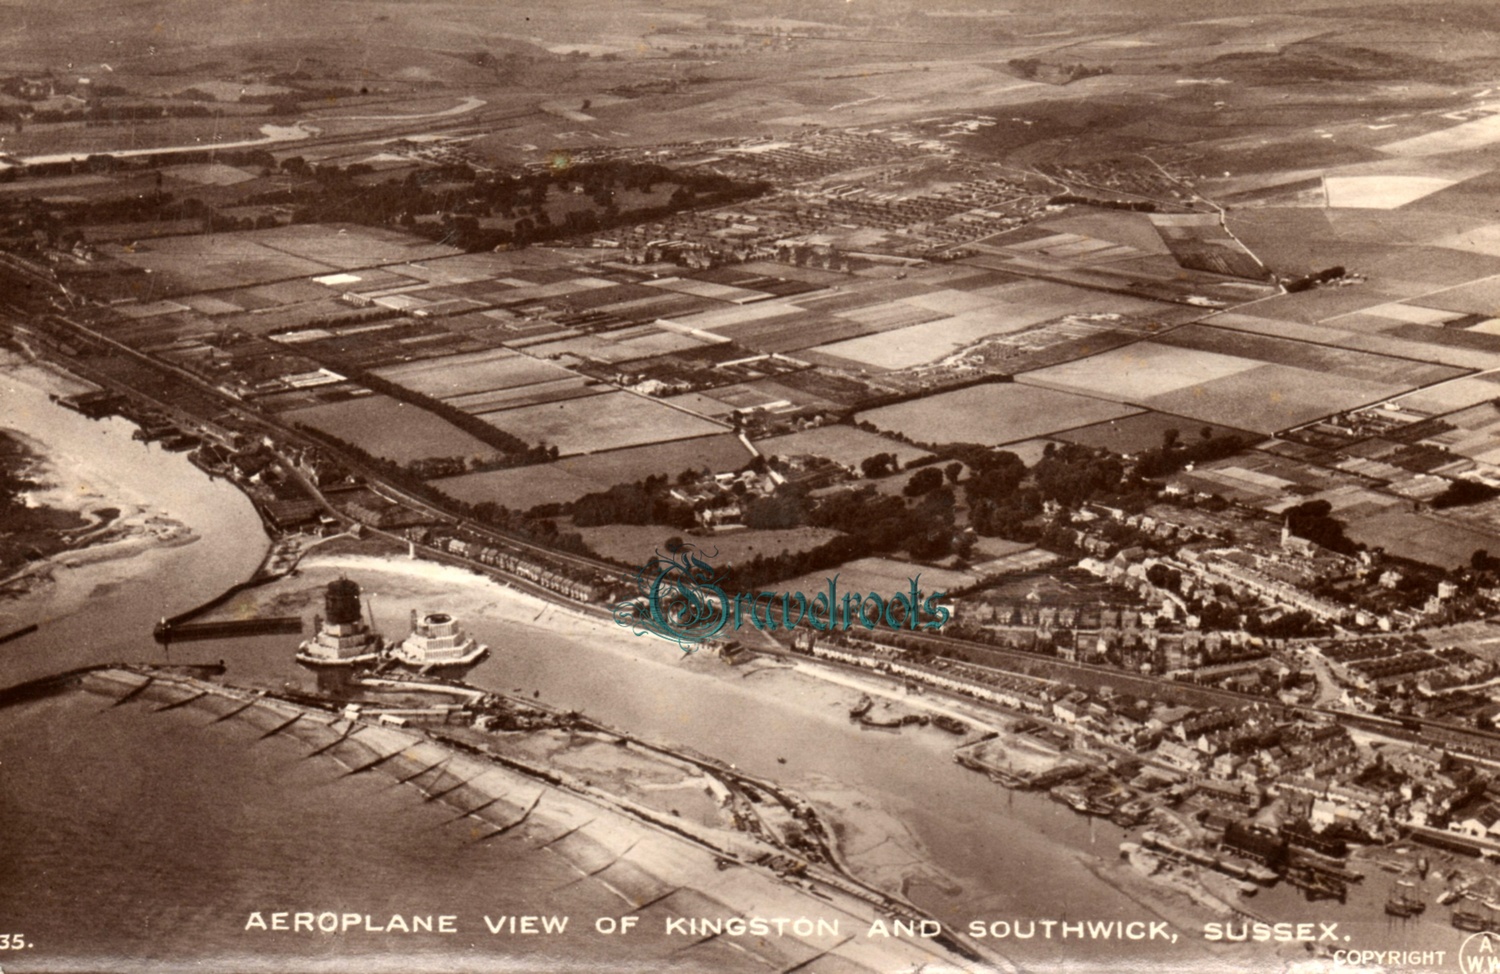 Old photo of Kingston & Southwick from the air, Sussex - click image to return